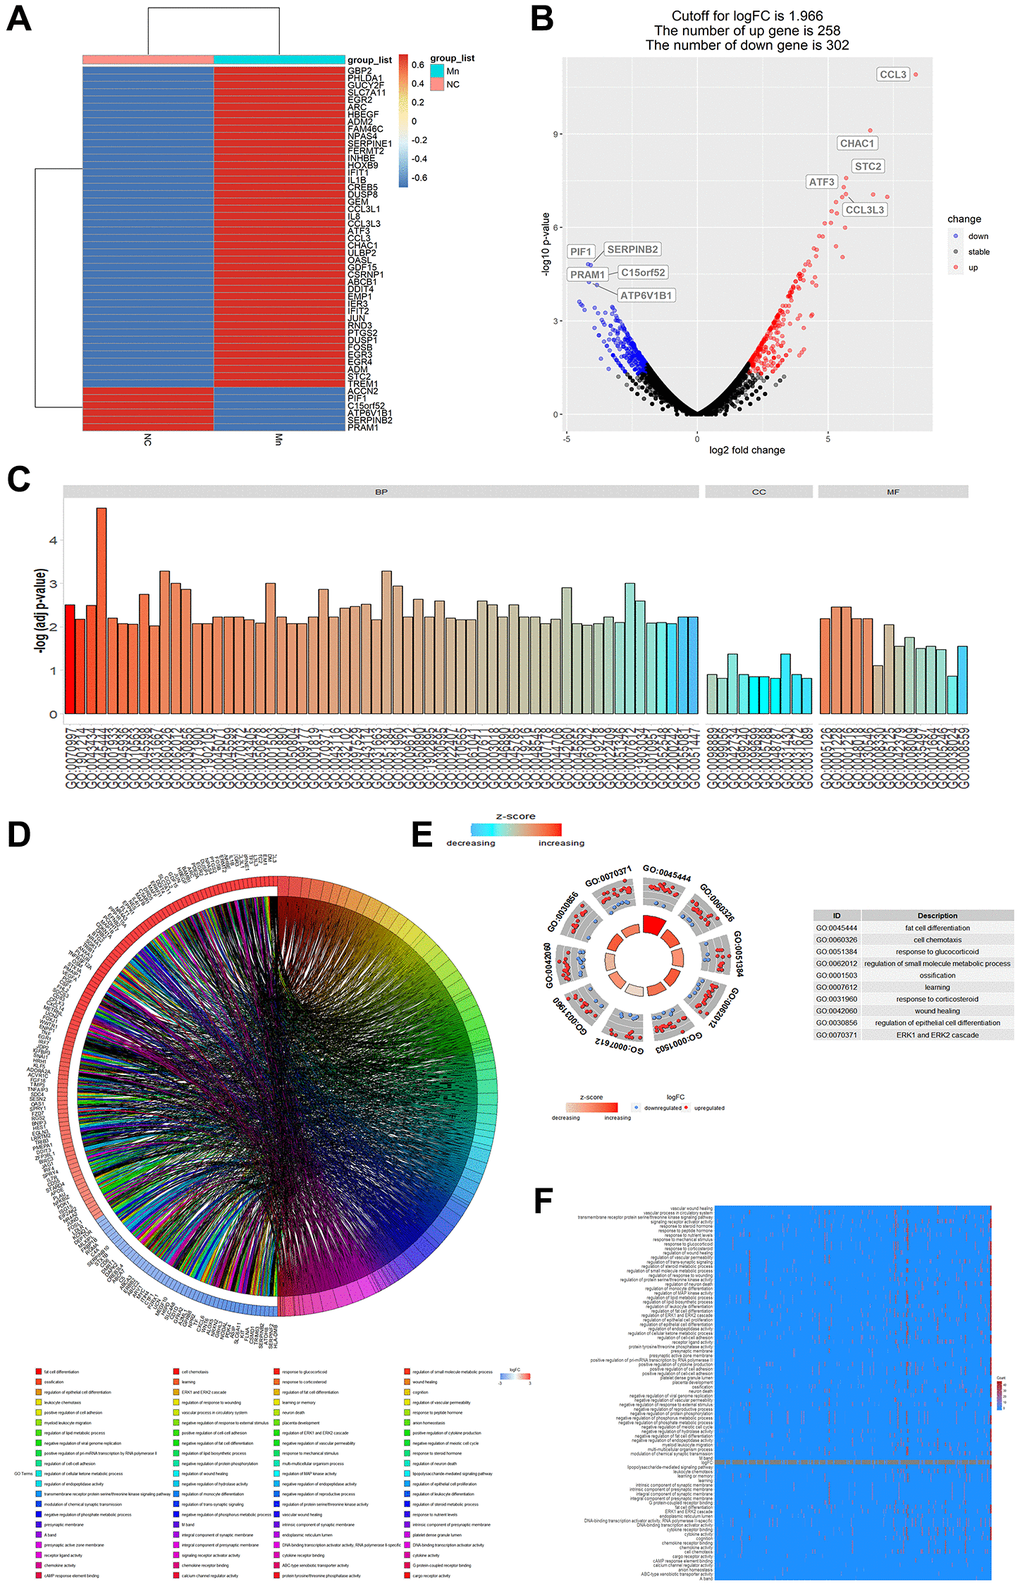 Analysis of gene regulation by Mn2+ in macrophages. (A) Heat map of cellular gene regulation after Mn2+ treatment. (B) Volcano plot of differentially expressed genes with a log-fold change (logarithmic value of differential gene expression) cut-off value of 1.966. (C) Histogram of GO enrichment terms. (D) Chord plot of enriched genes and their related pathways. (E) GO terms of upregulated and downregulated genes. (F) Heatmap of enrichment results.